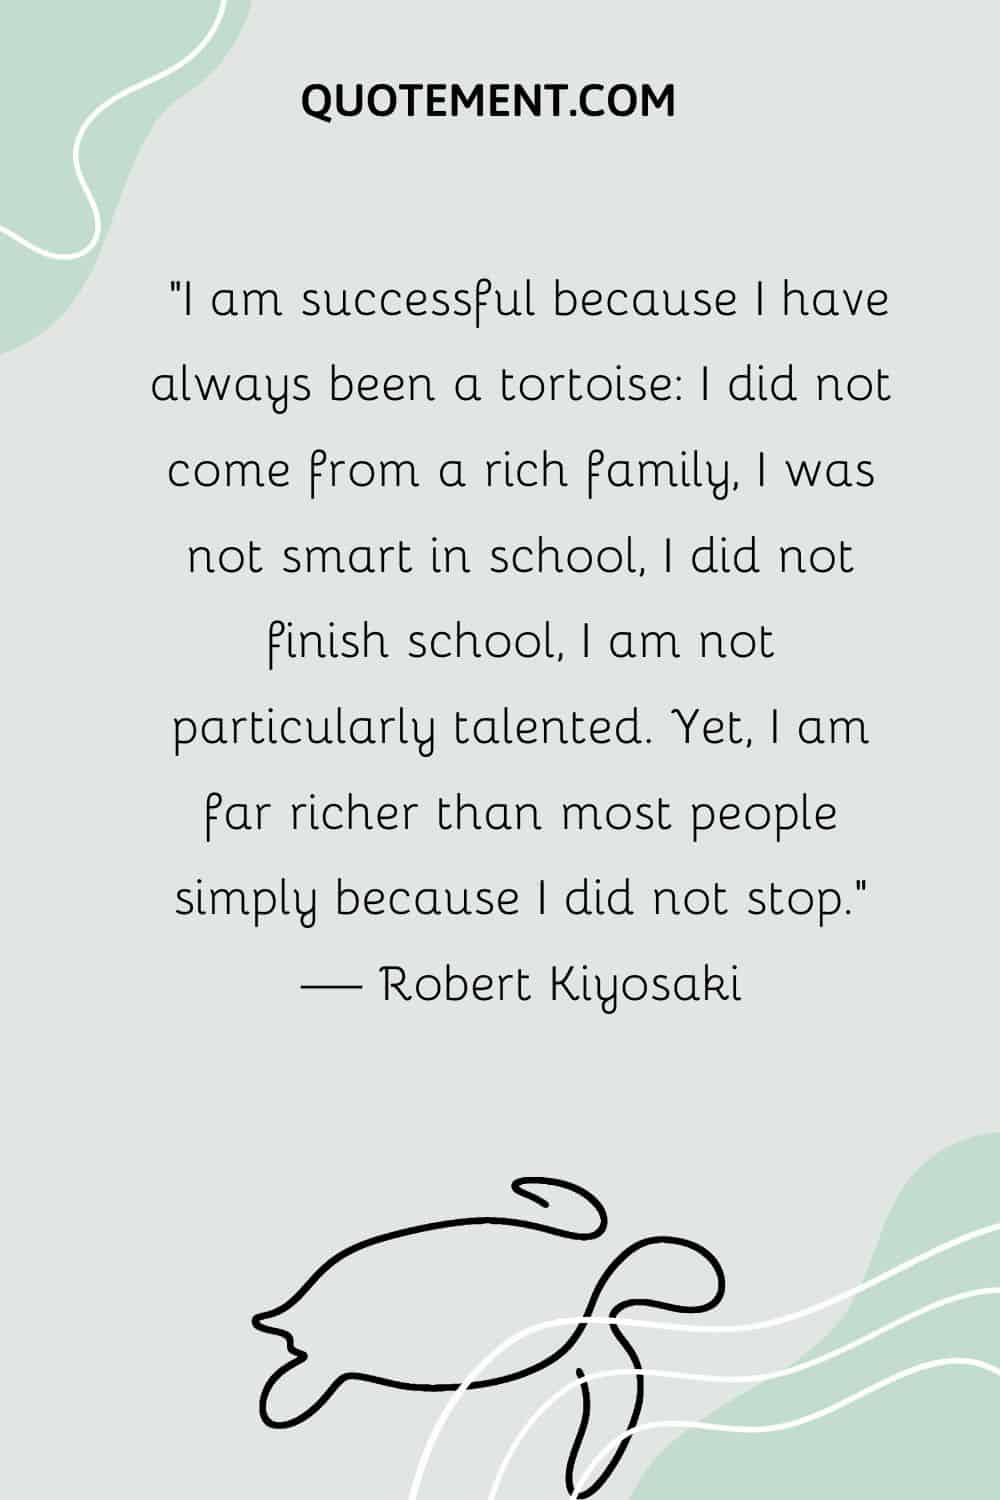 I am successful because I have always been a tortoise